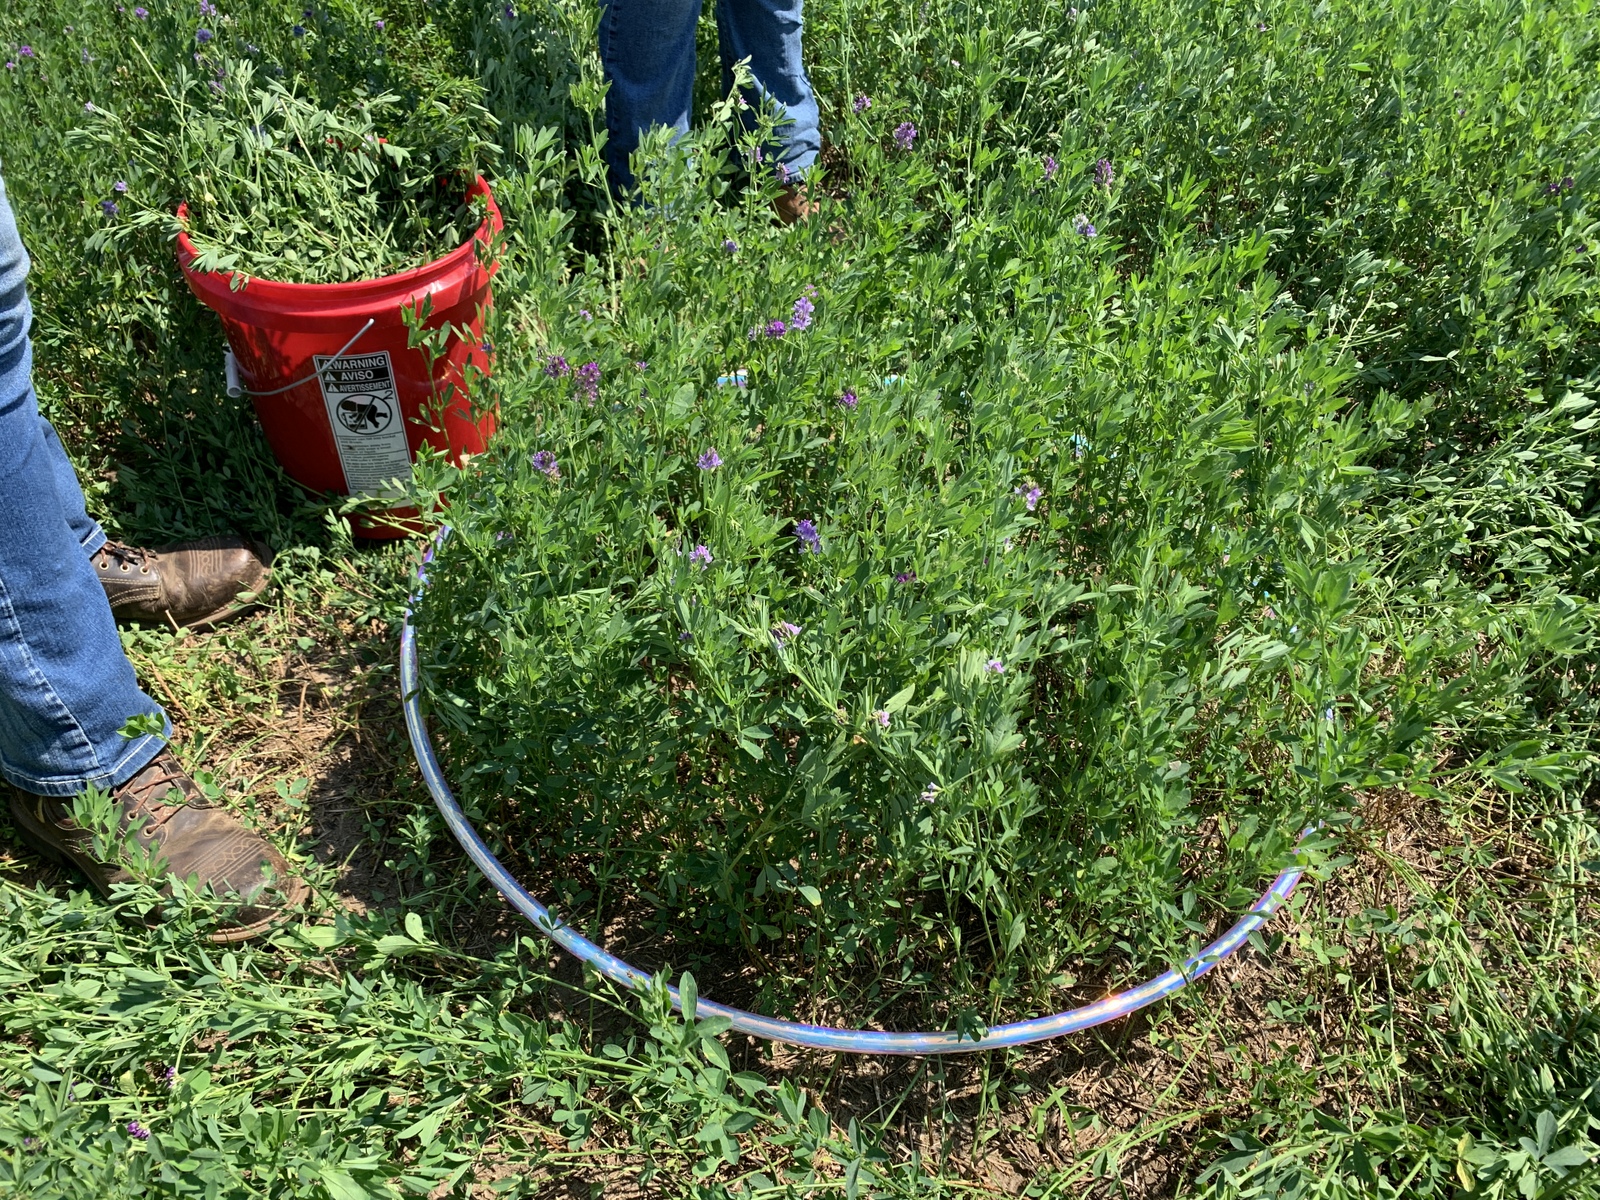 An alfalfa plot sub-samples for yield and tissue sampling.  The Hula Hoop is an accepted method.